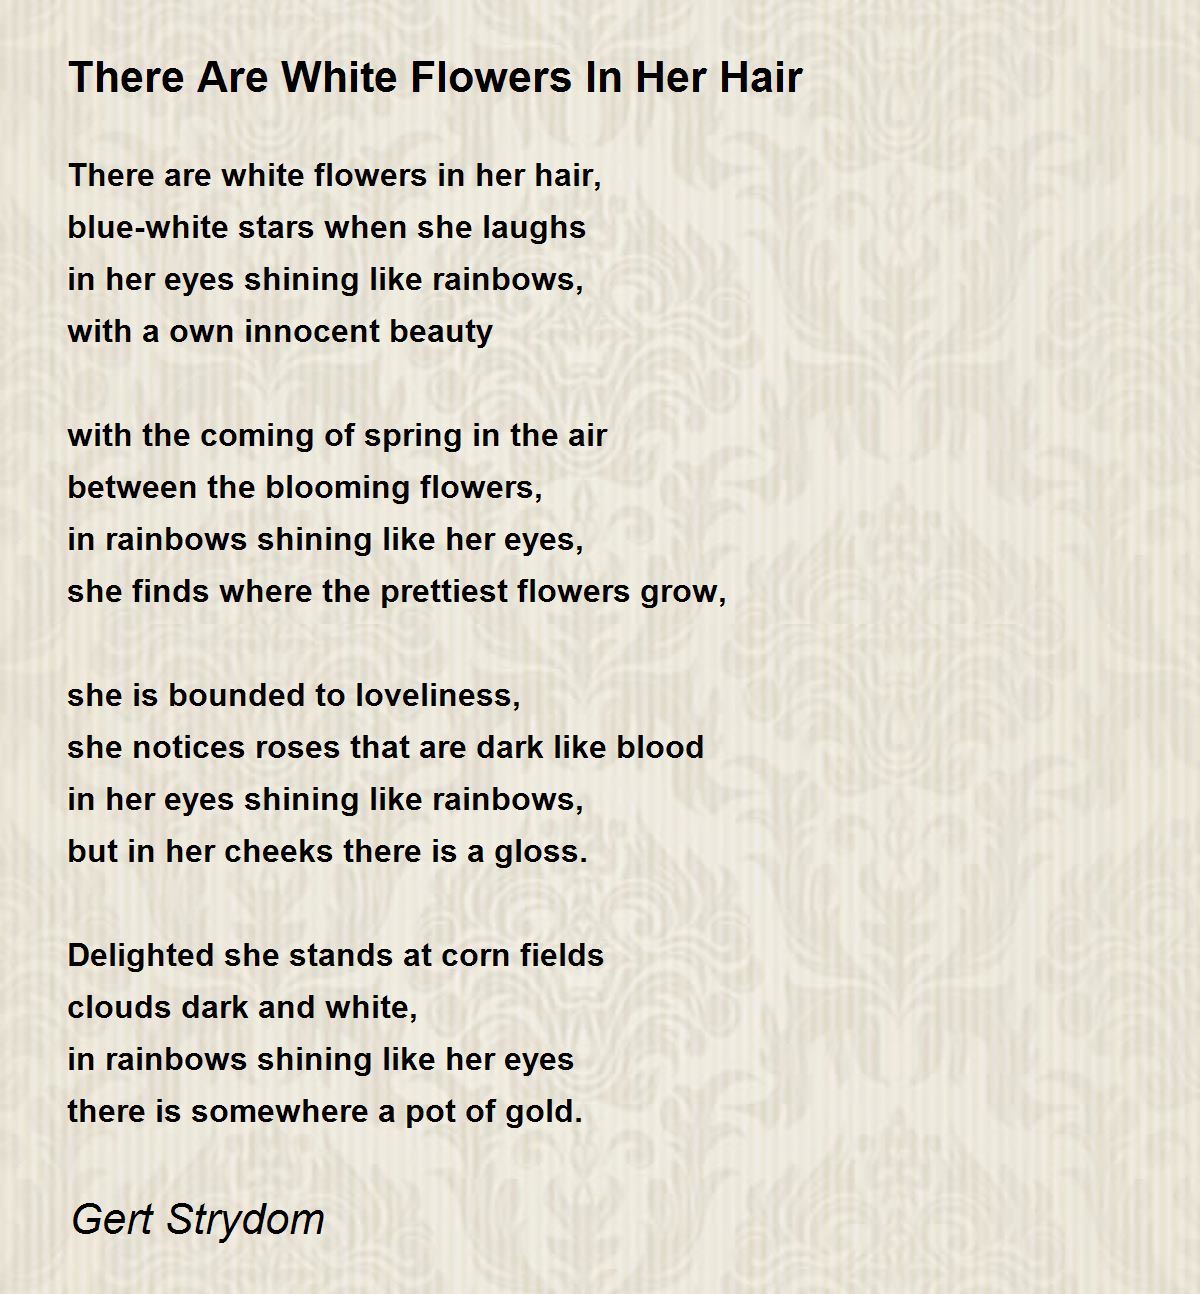 There Are White Flowers In Her Hair - There Are White Flowers In Her Hair  Poem by Gert Strydom